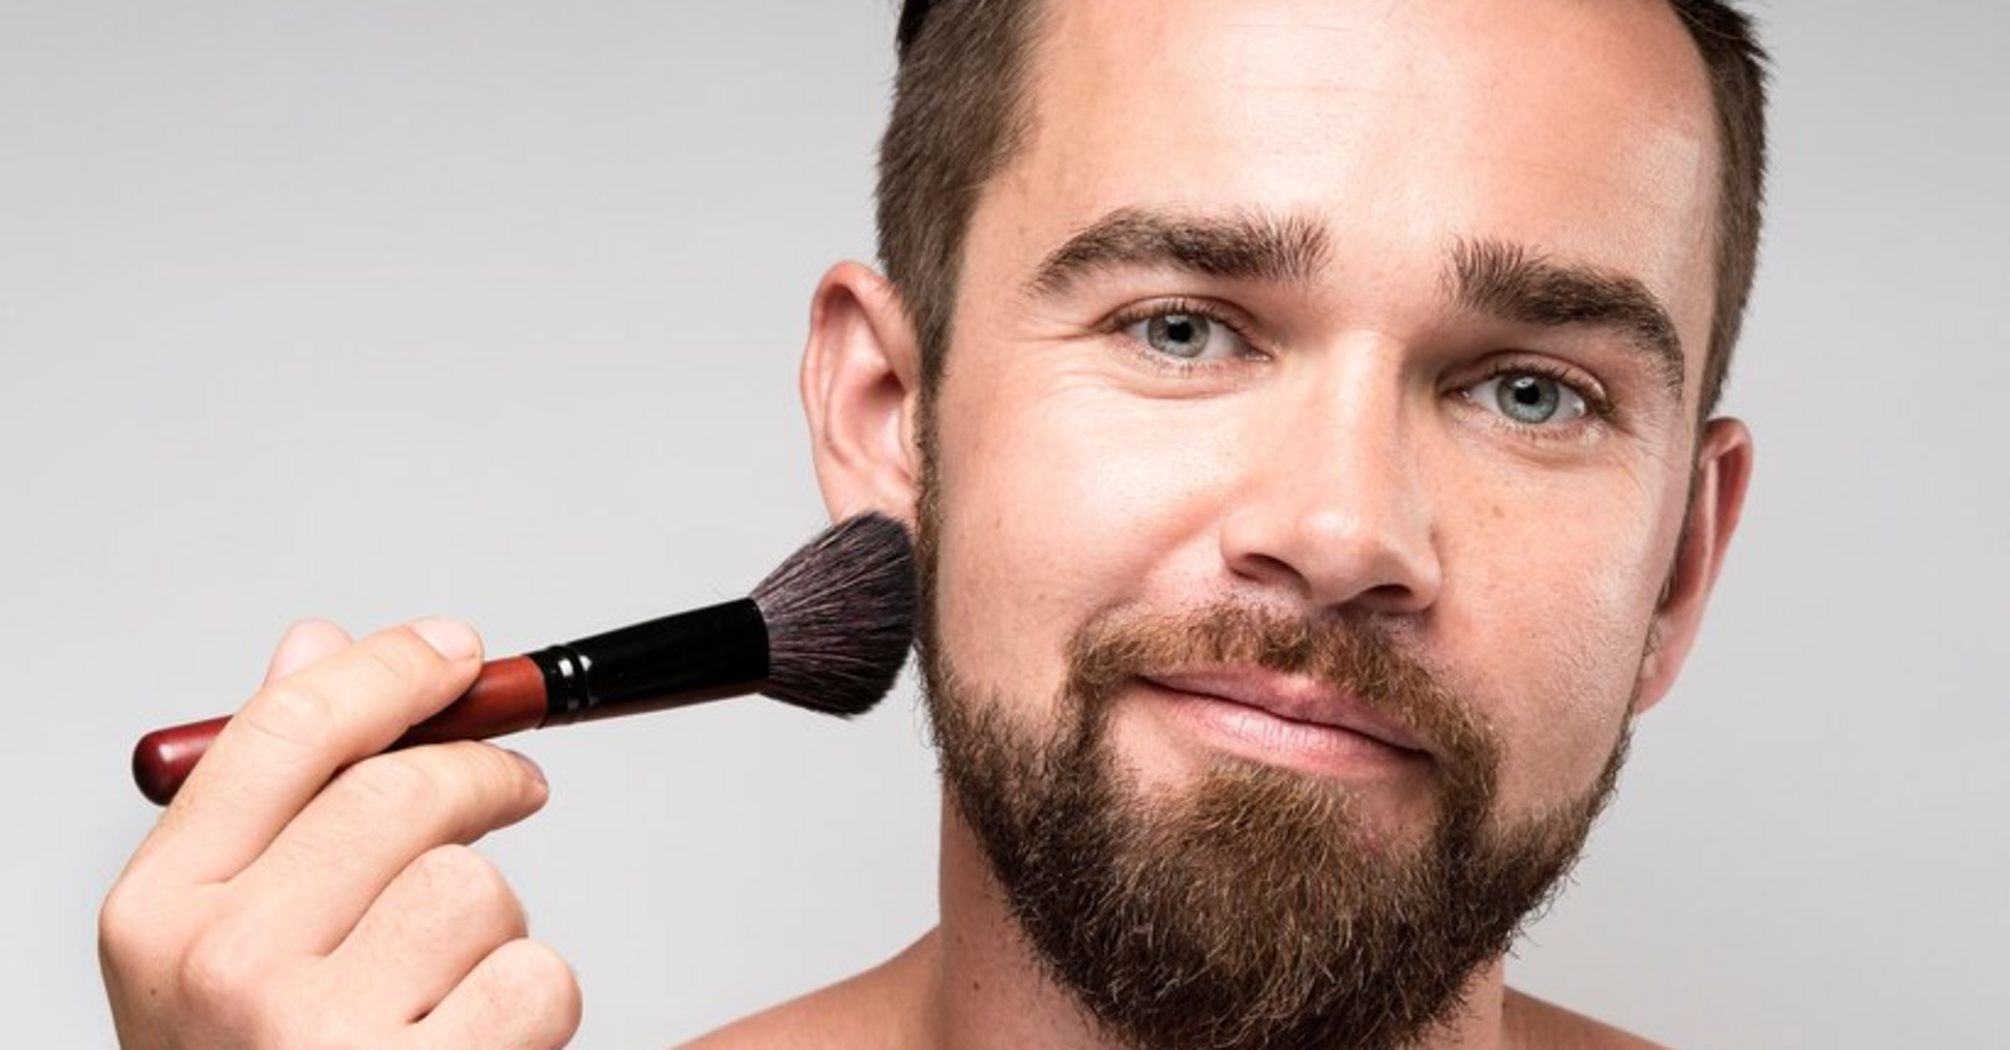 How to do the right men's makeup: the main secrets